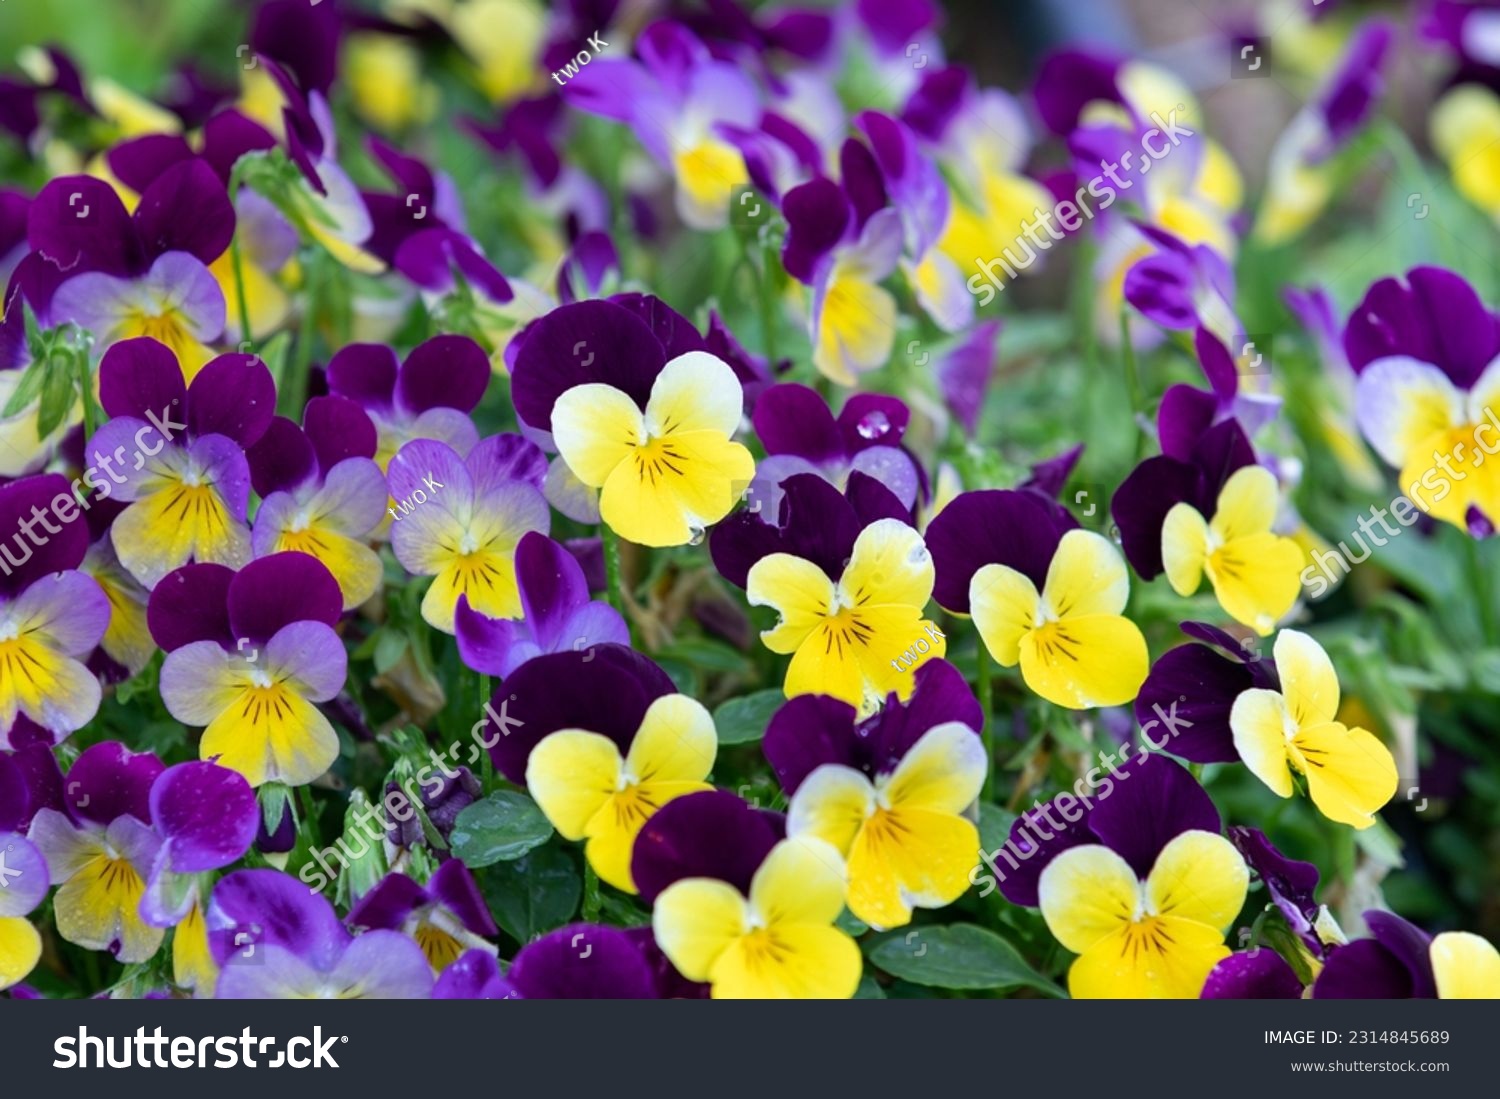 A viola pansy found in the botanical garden. viola tricolor, little pansy #2314845689